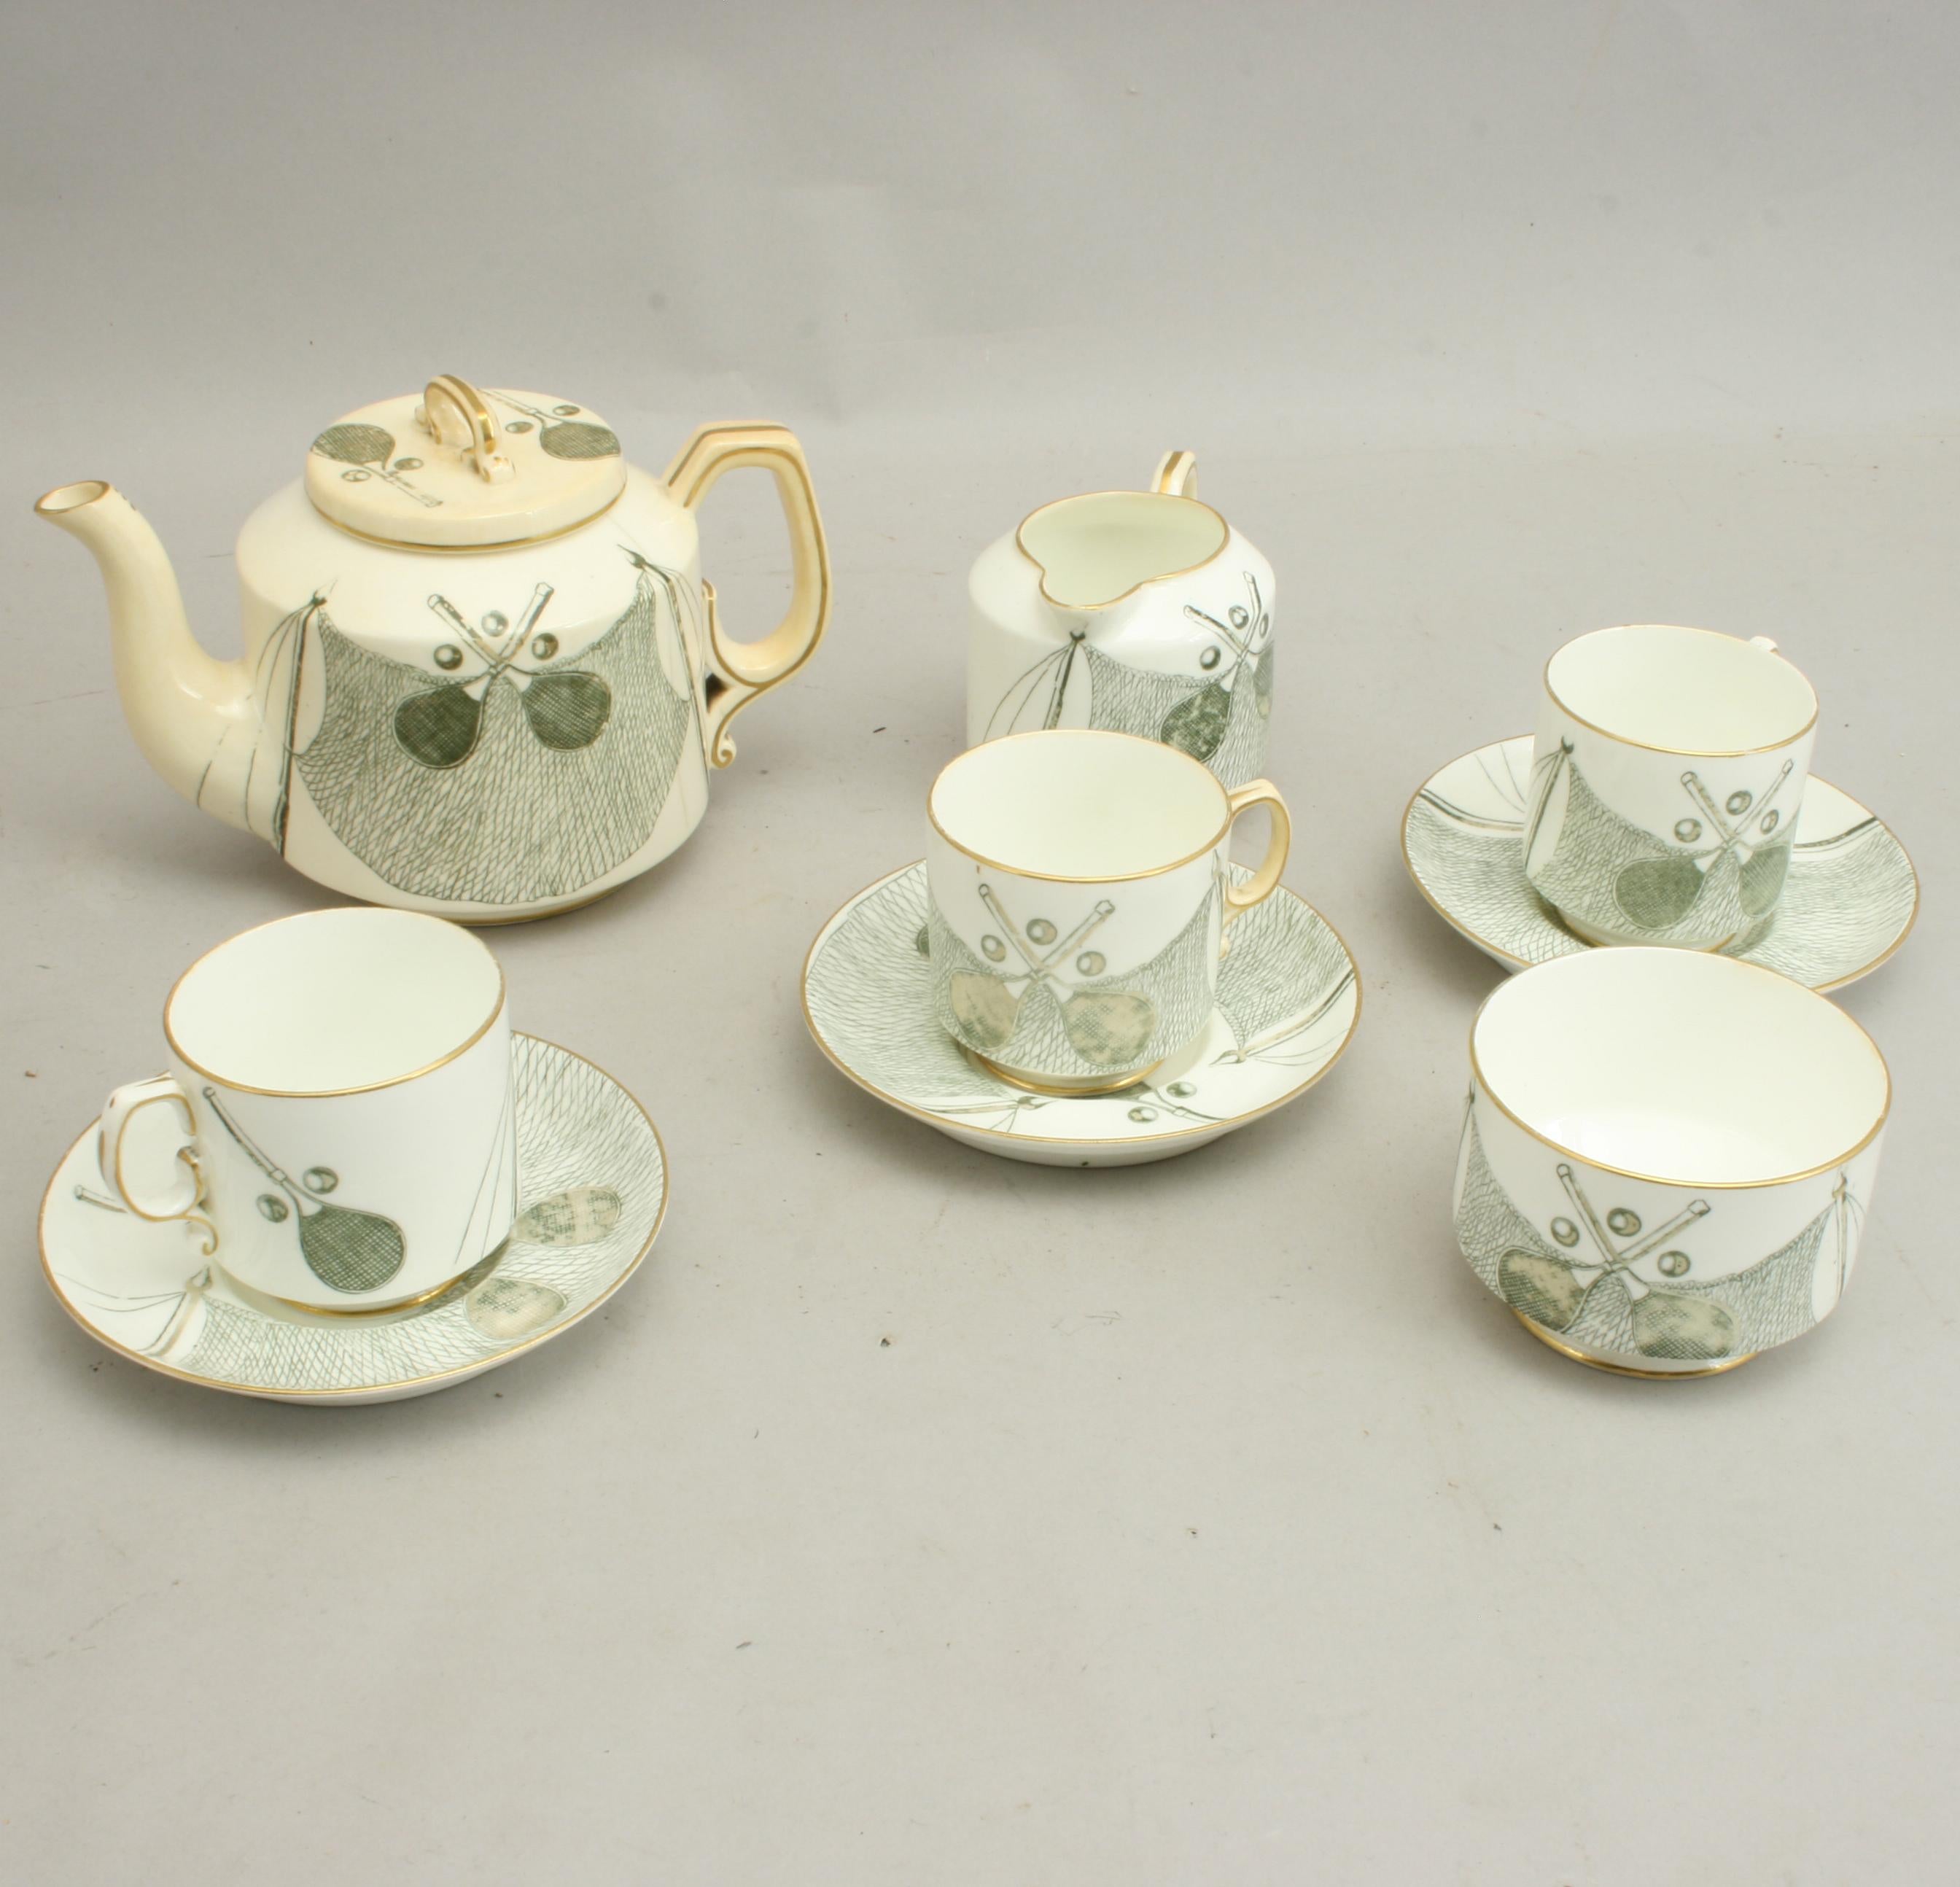 Antique China Tennis Tea Set by George Jones & Sons, 19th Century For Sale 2